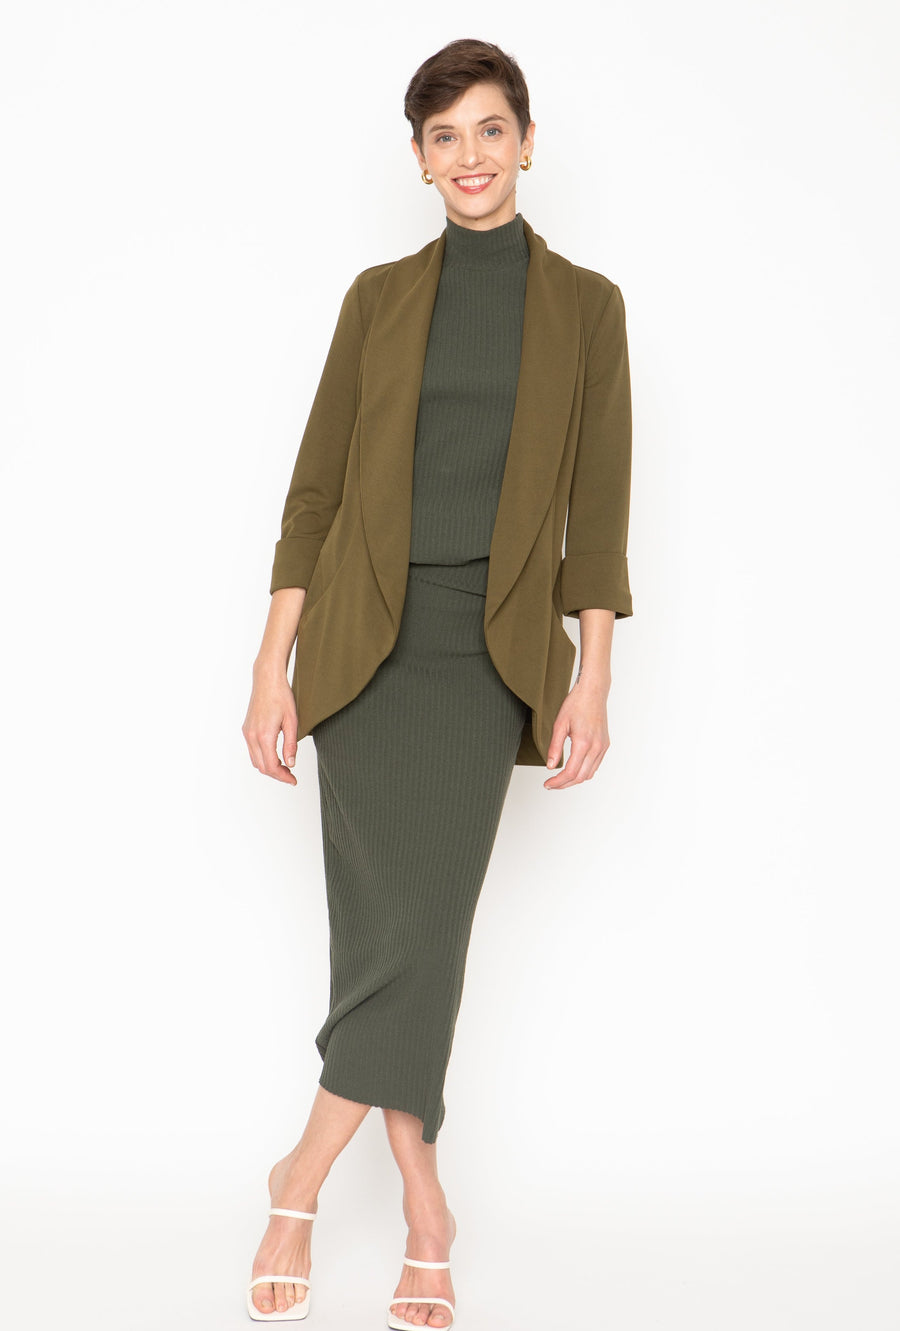 No Srcipt image - Images of 1 of 7 MELANIE KNIT JACKET IN PONTE- MARTINI OLIVE